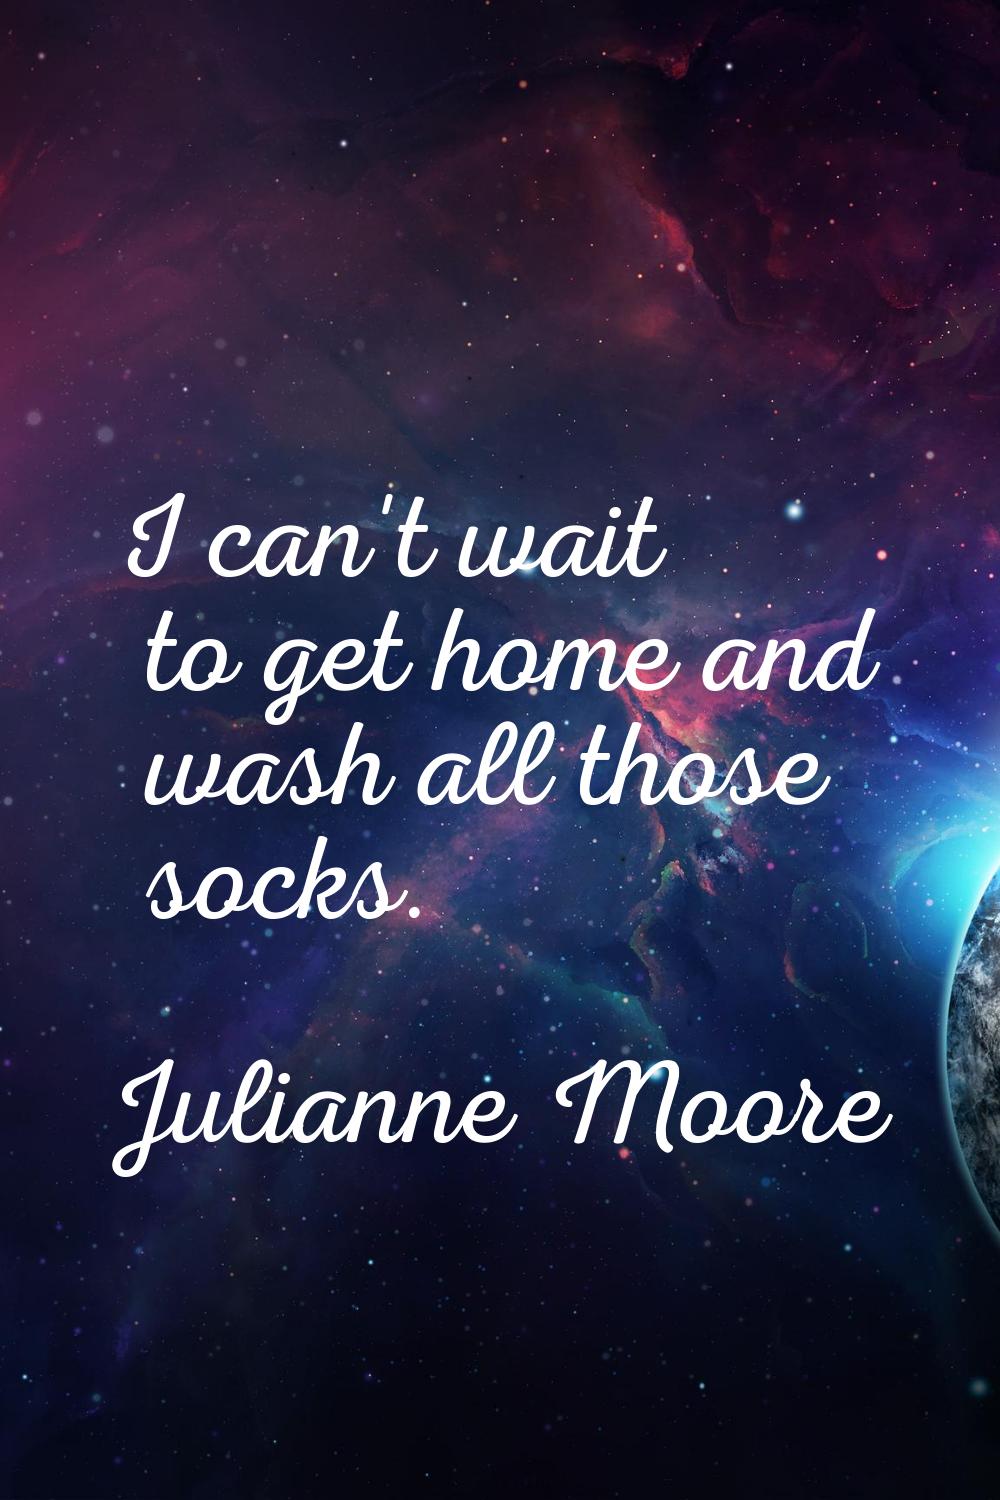 I can't wait to get home and wash all those socks.